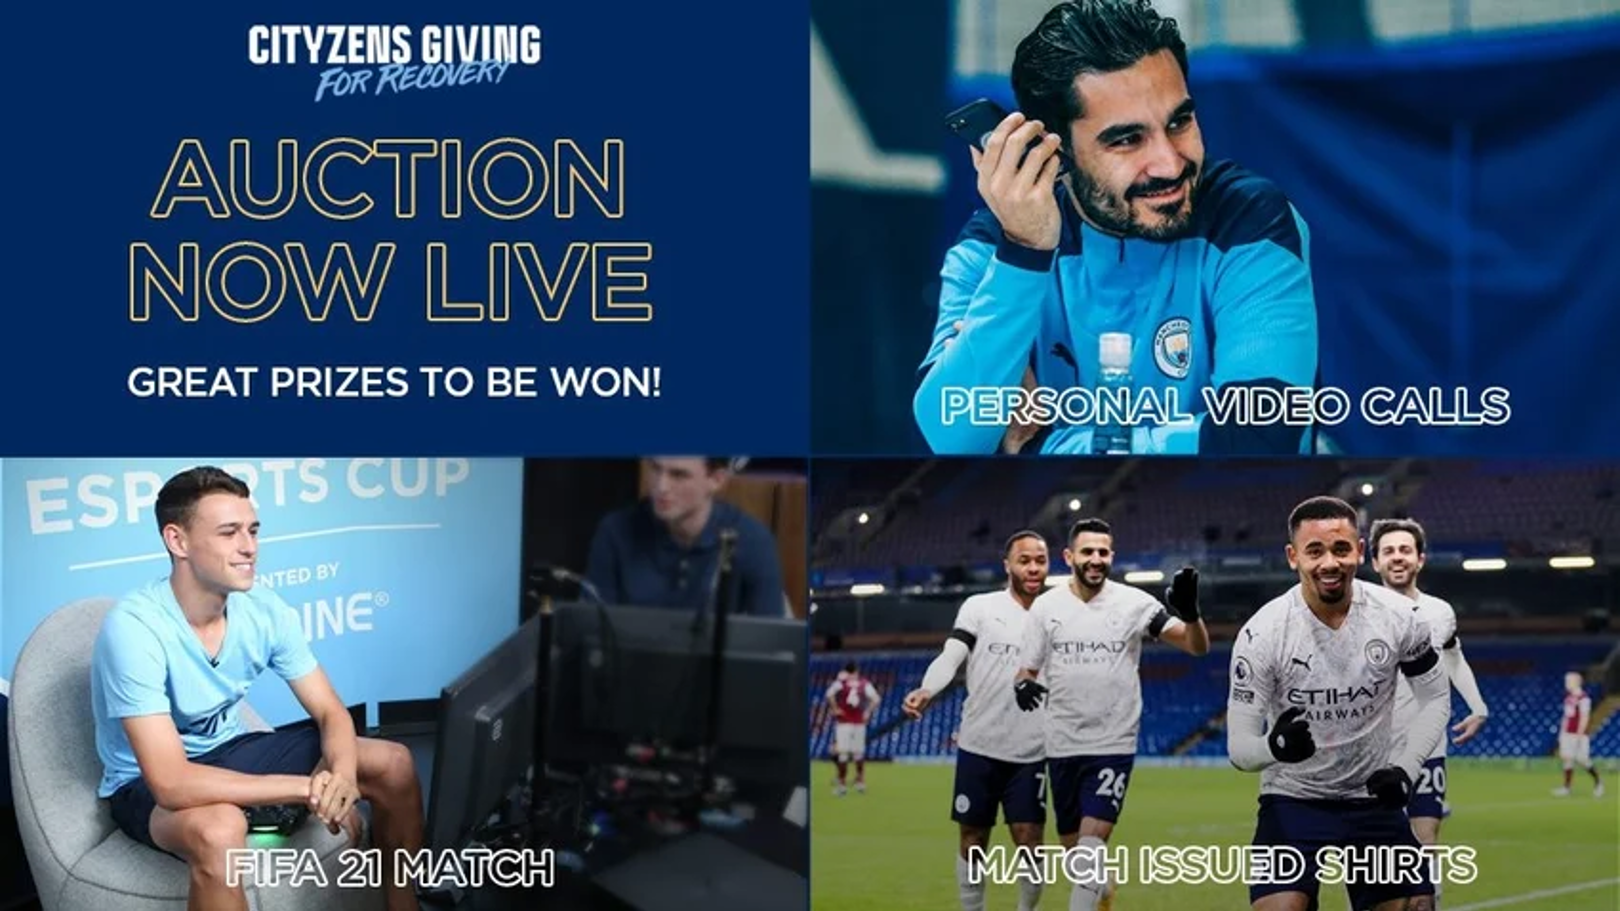 Cityzens Giving for Recovery Auction countdown begins